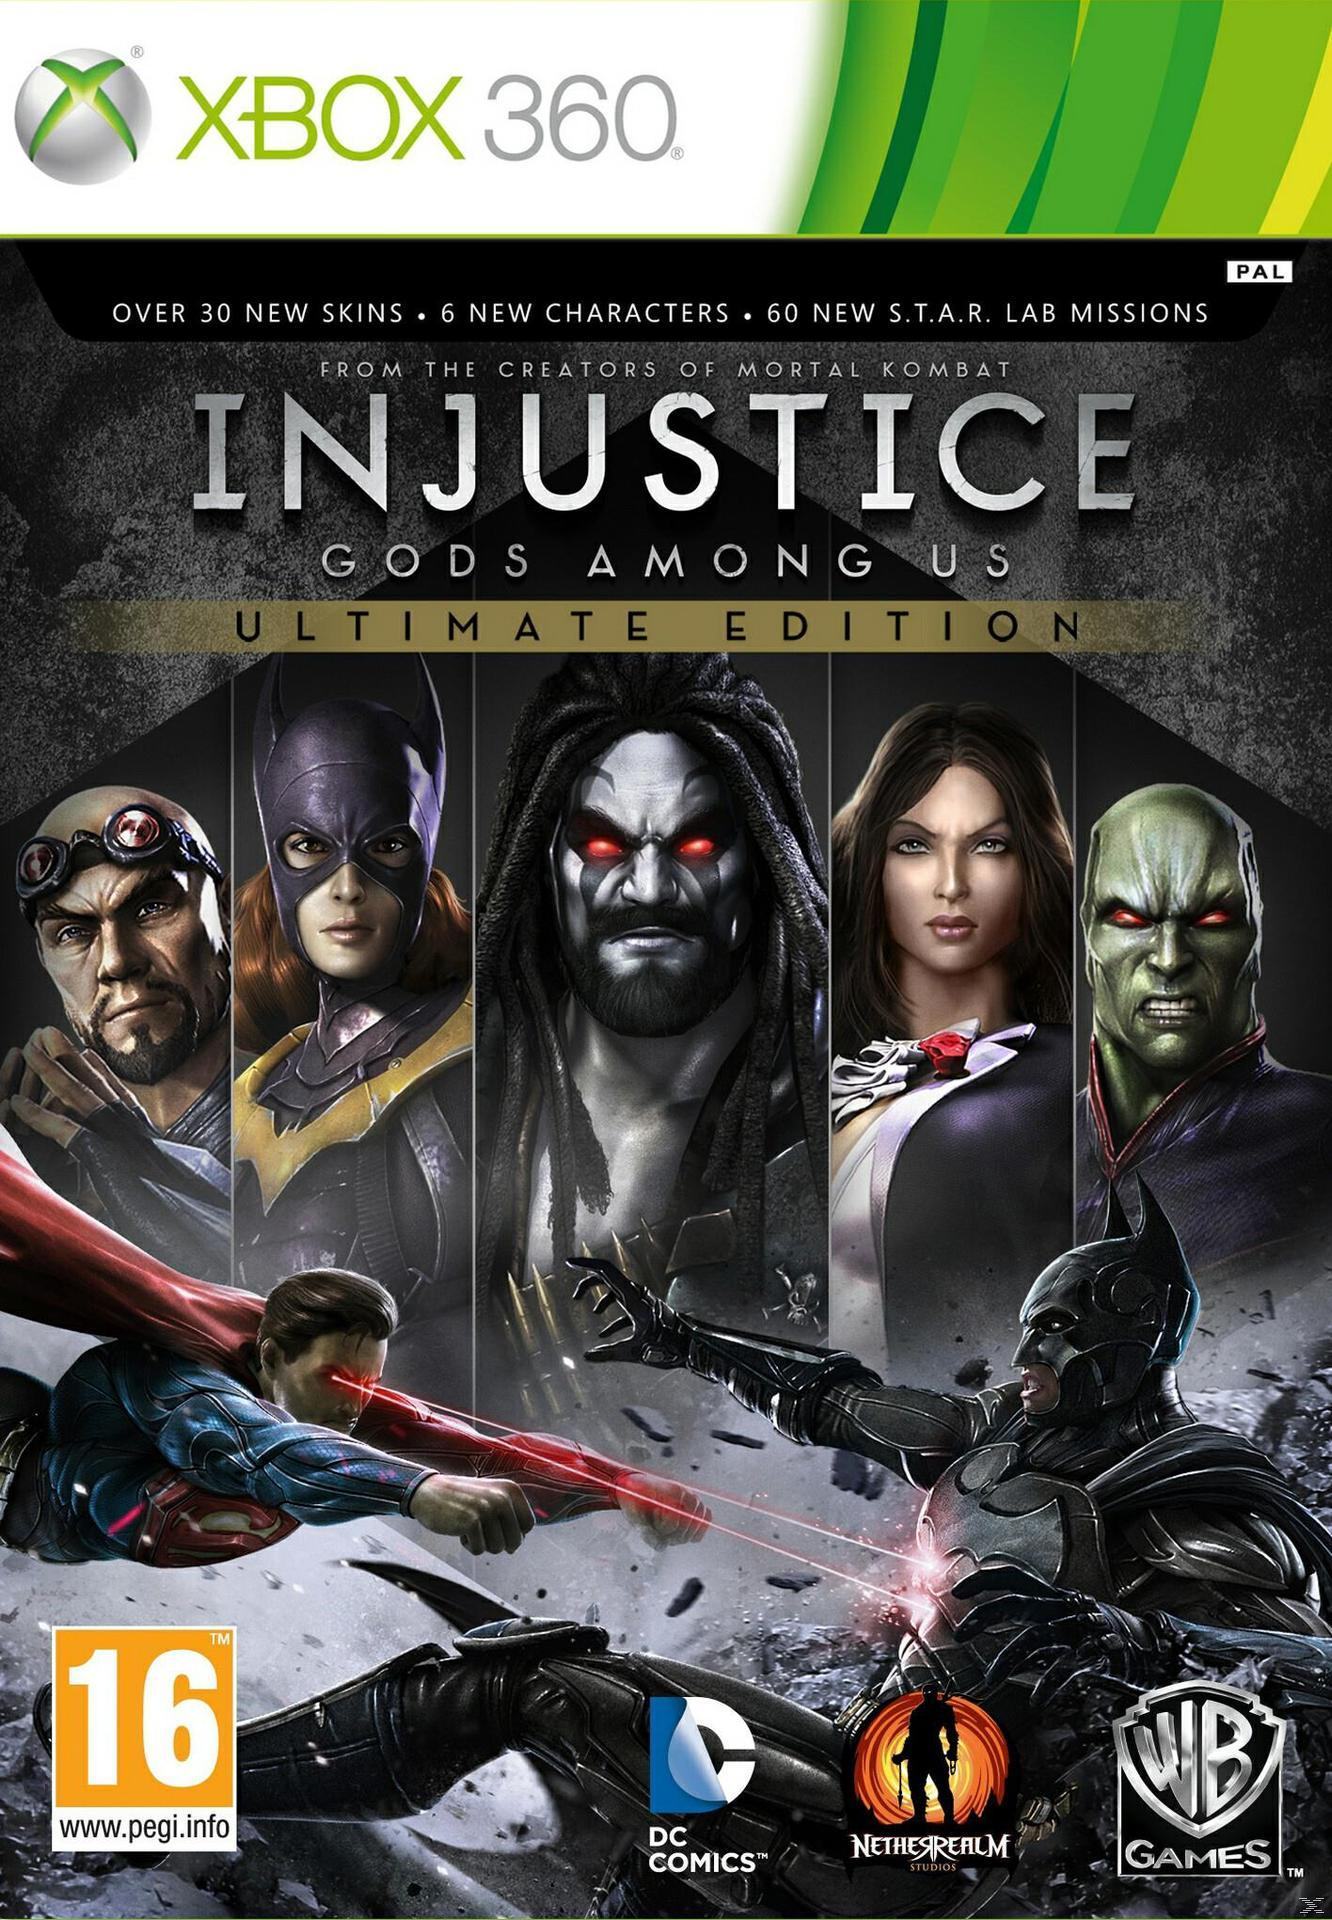 Injustice (Ultimate Edition) 360] - [Xbox